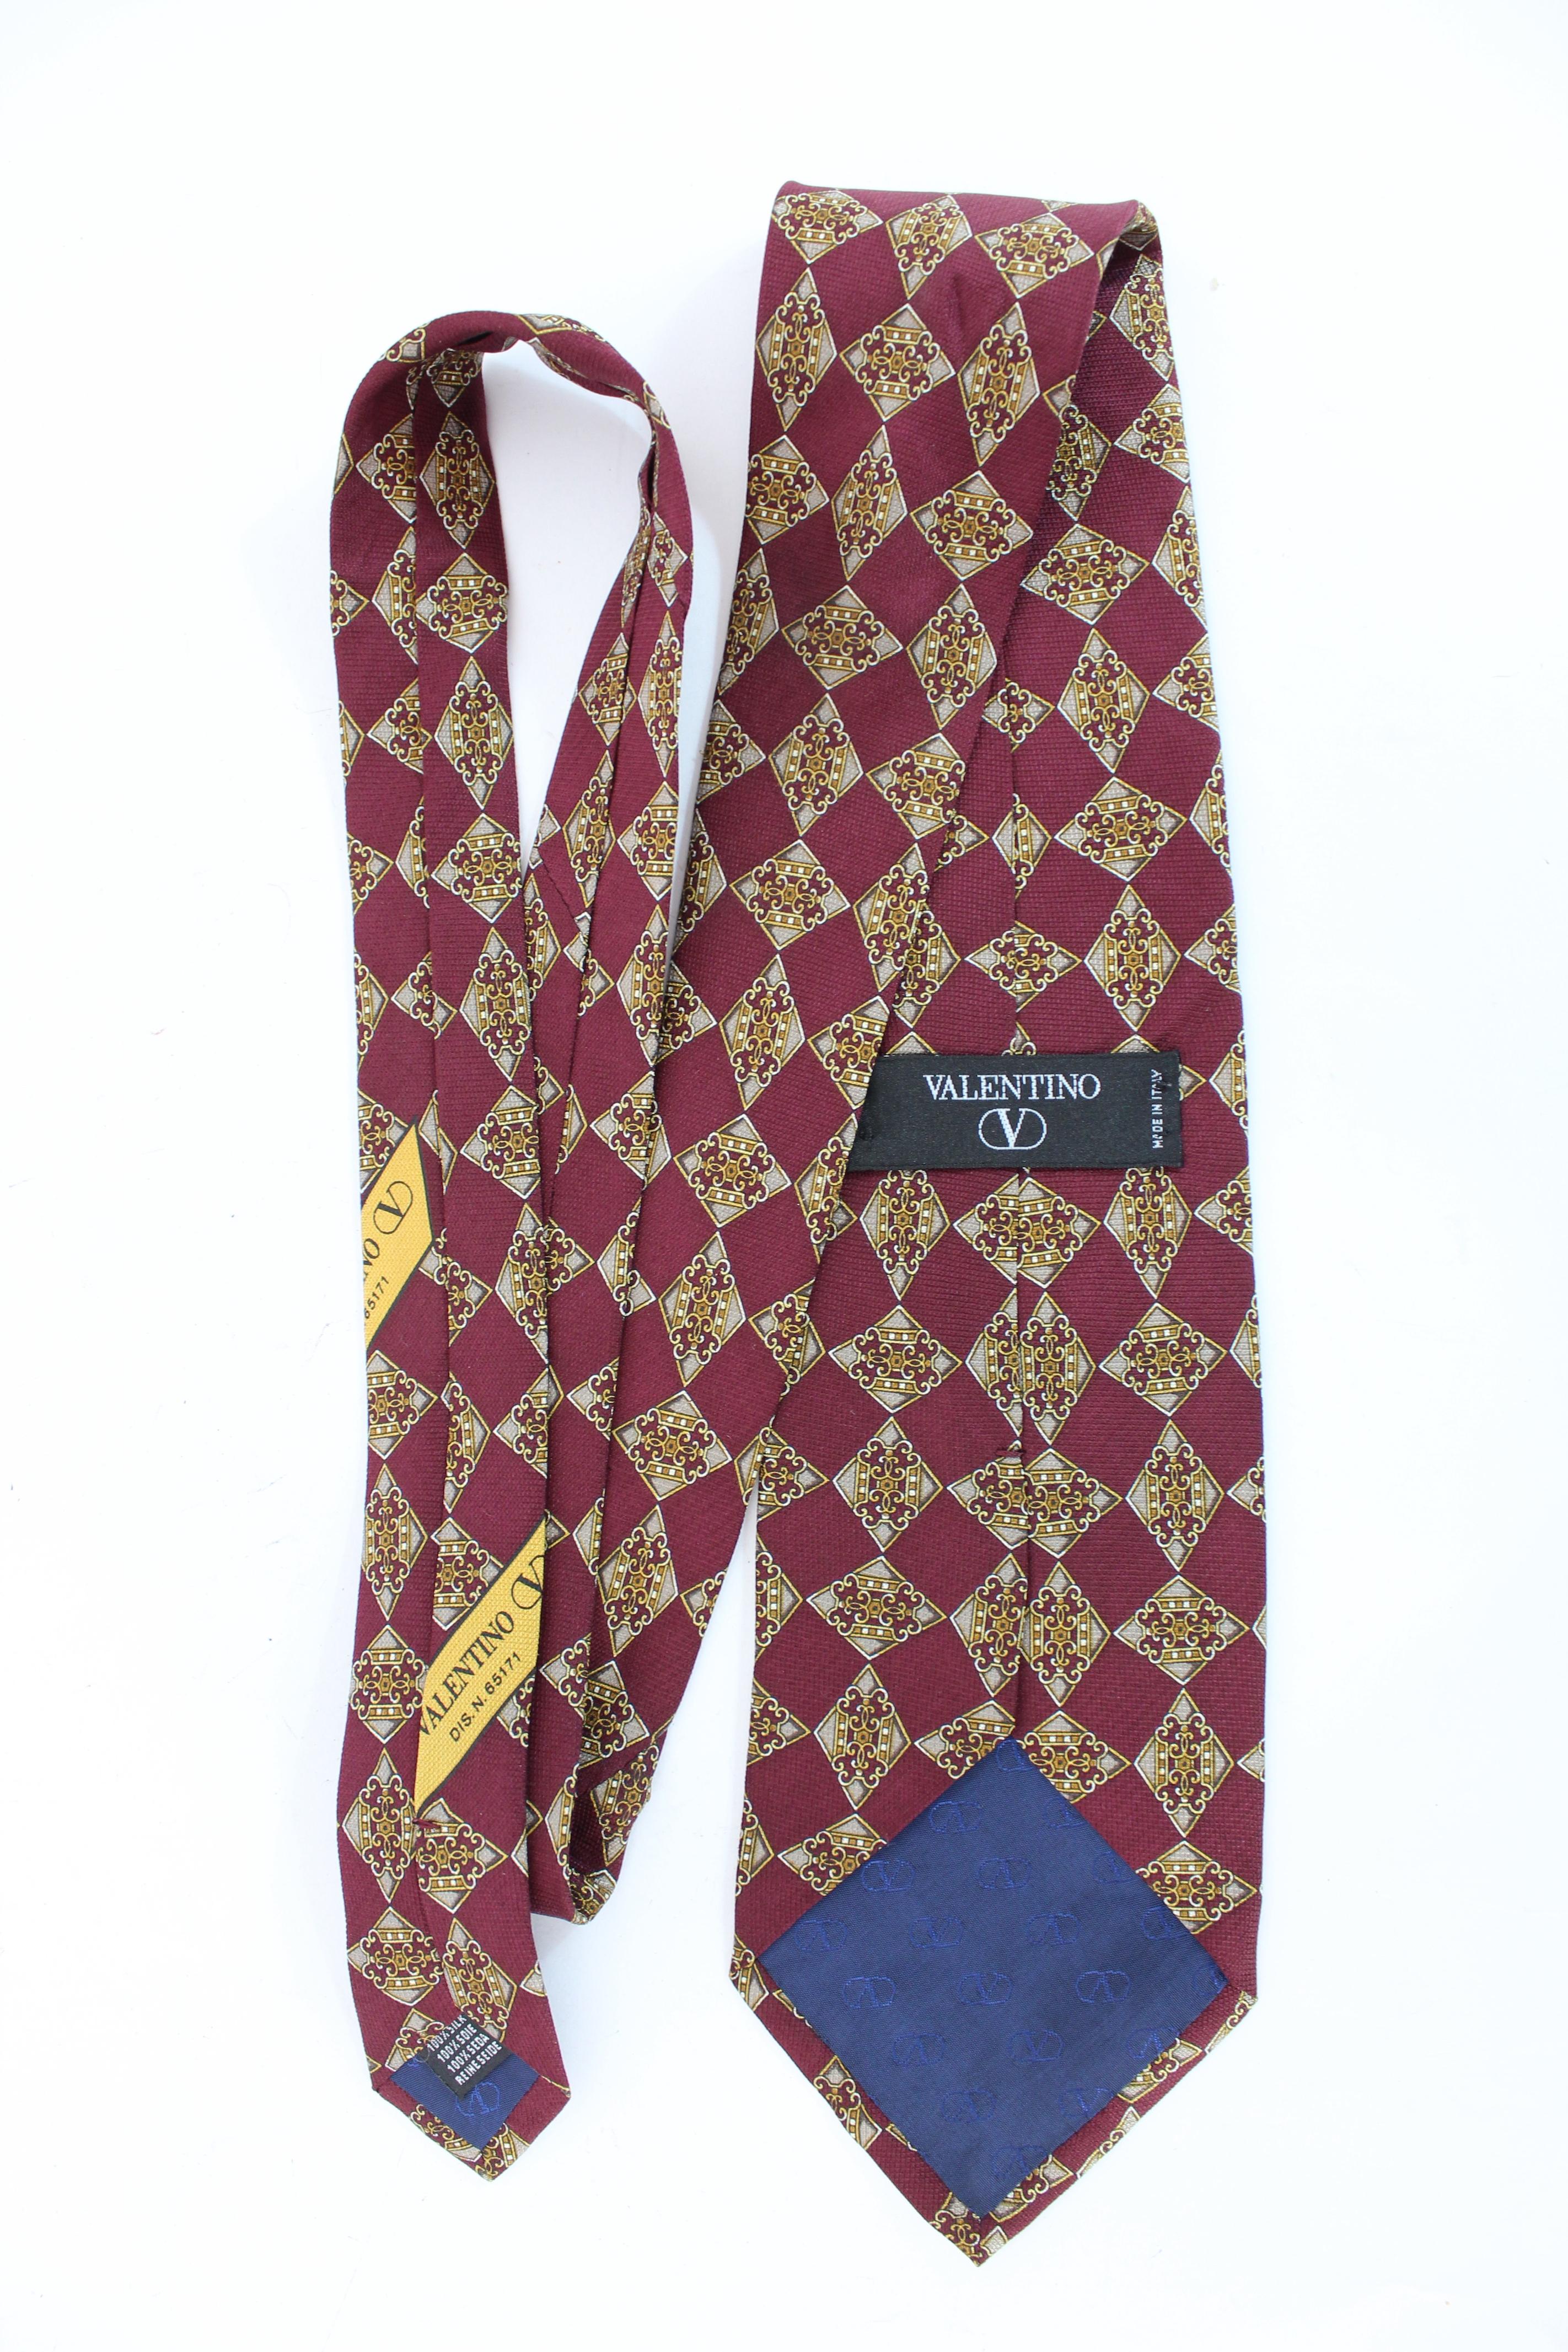 Valentino 90s vintage tie. Classic tie, burgundy and gold color with rhombuses pattern. 100% silk fabric. Made in Italy.

Condition: Excellent

Item used few times, it remains in its excellent condition. There are no visible signs of wear, and it is